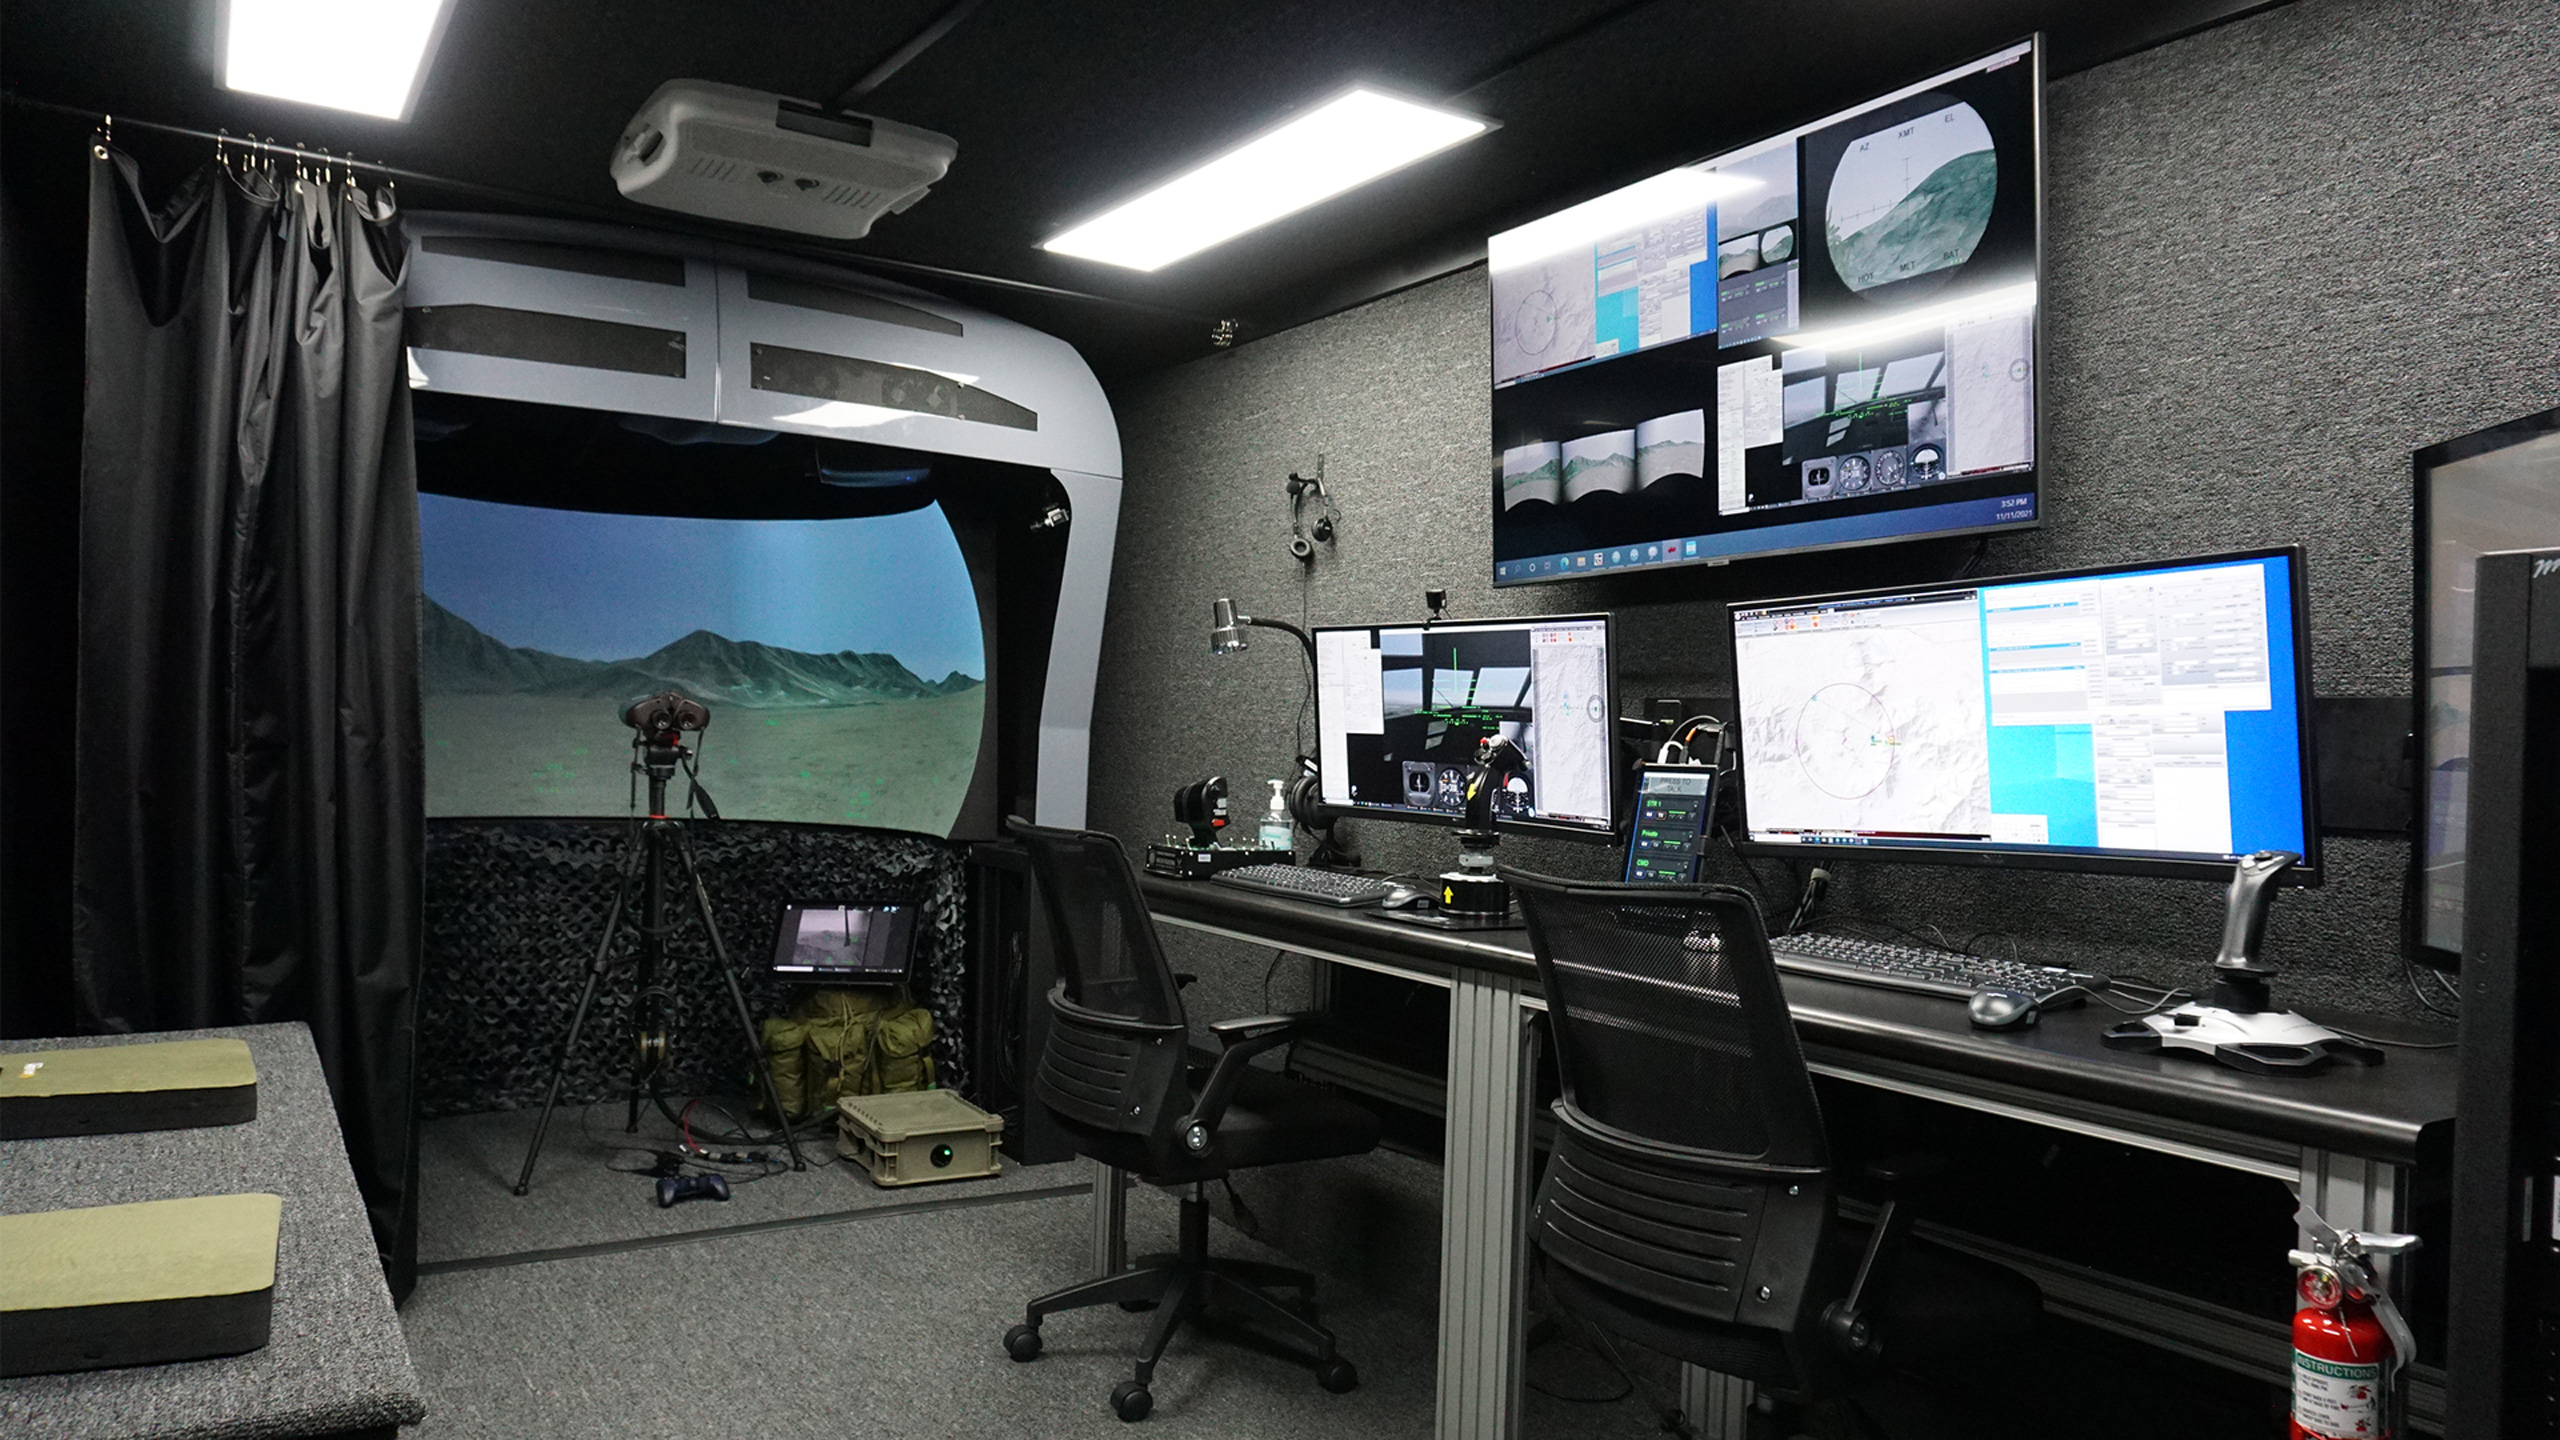 The Trailer-Based Joint Fires Training System (image courtesy of Immersive Display Solutions)